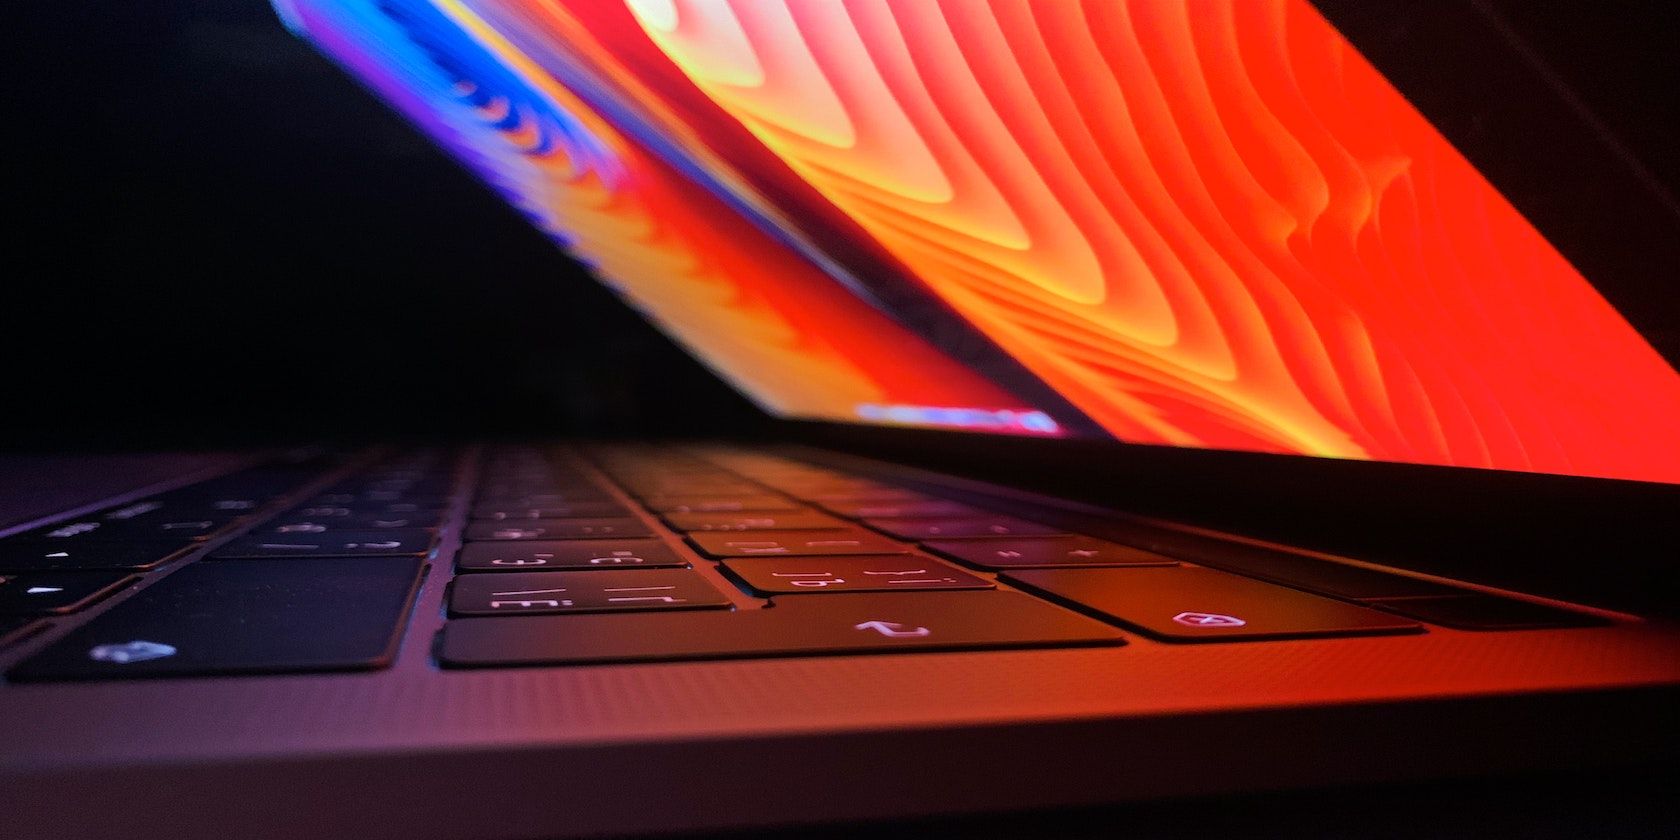 An up close photo of a MacBook Pro with a colorful background